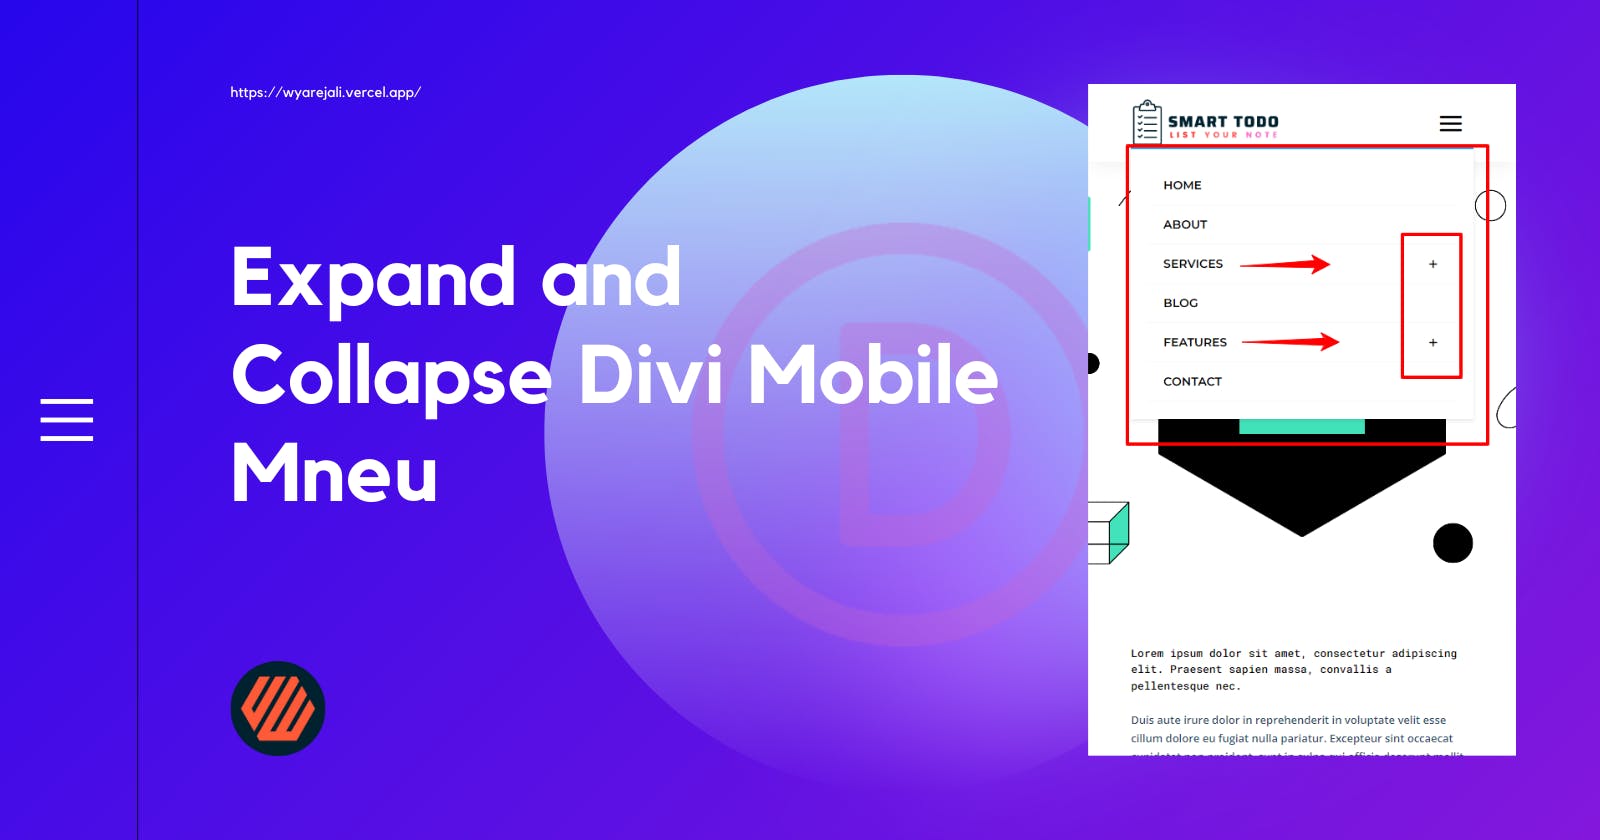 How To Collapse and Expands Divi Mobile Menu Submenus in a beautiful way